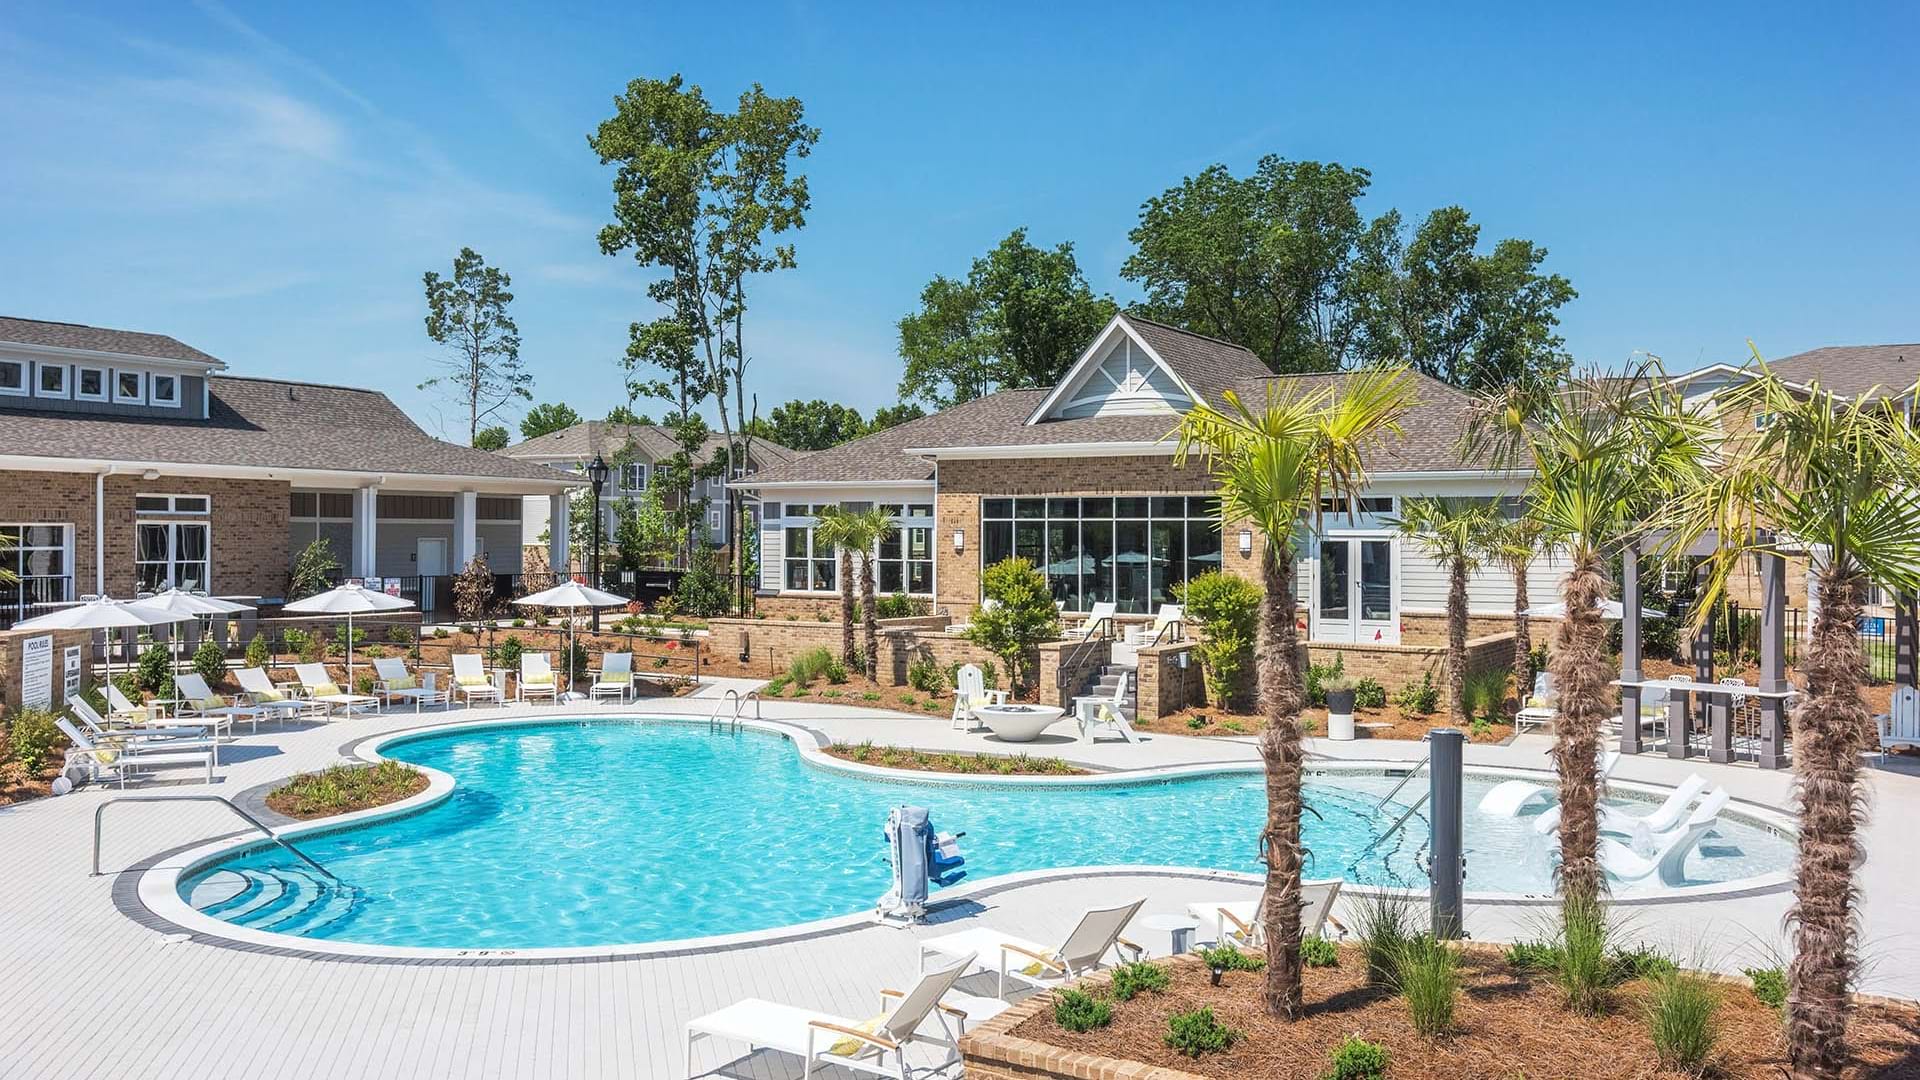 Resort-Style Pool and Sun Deck at Our Steele Creek Apartments